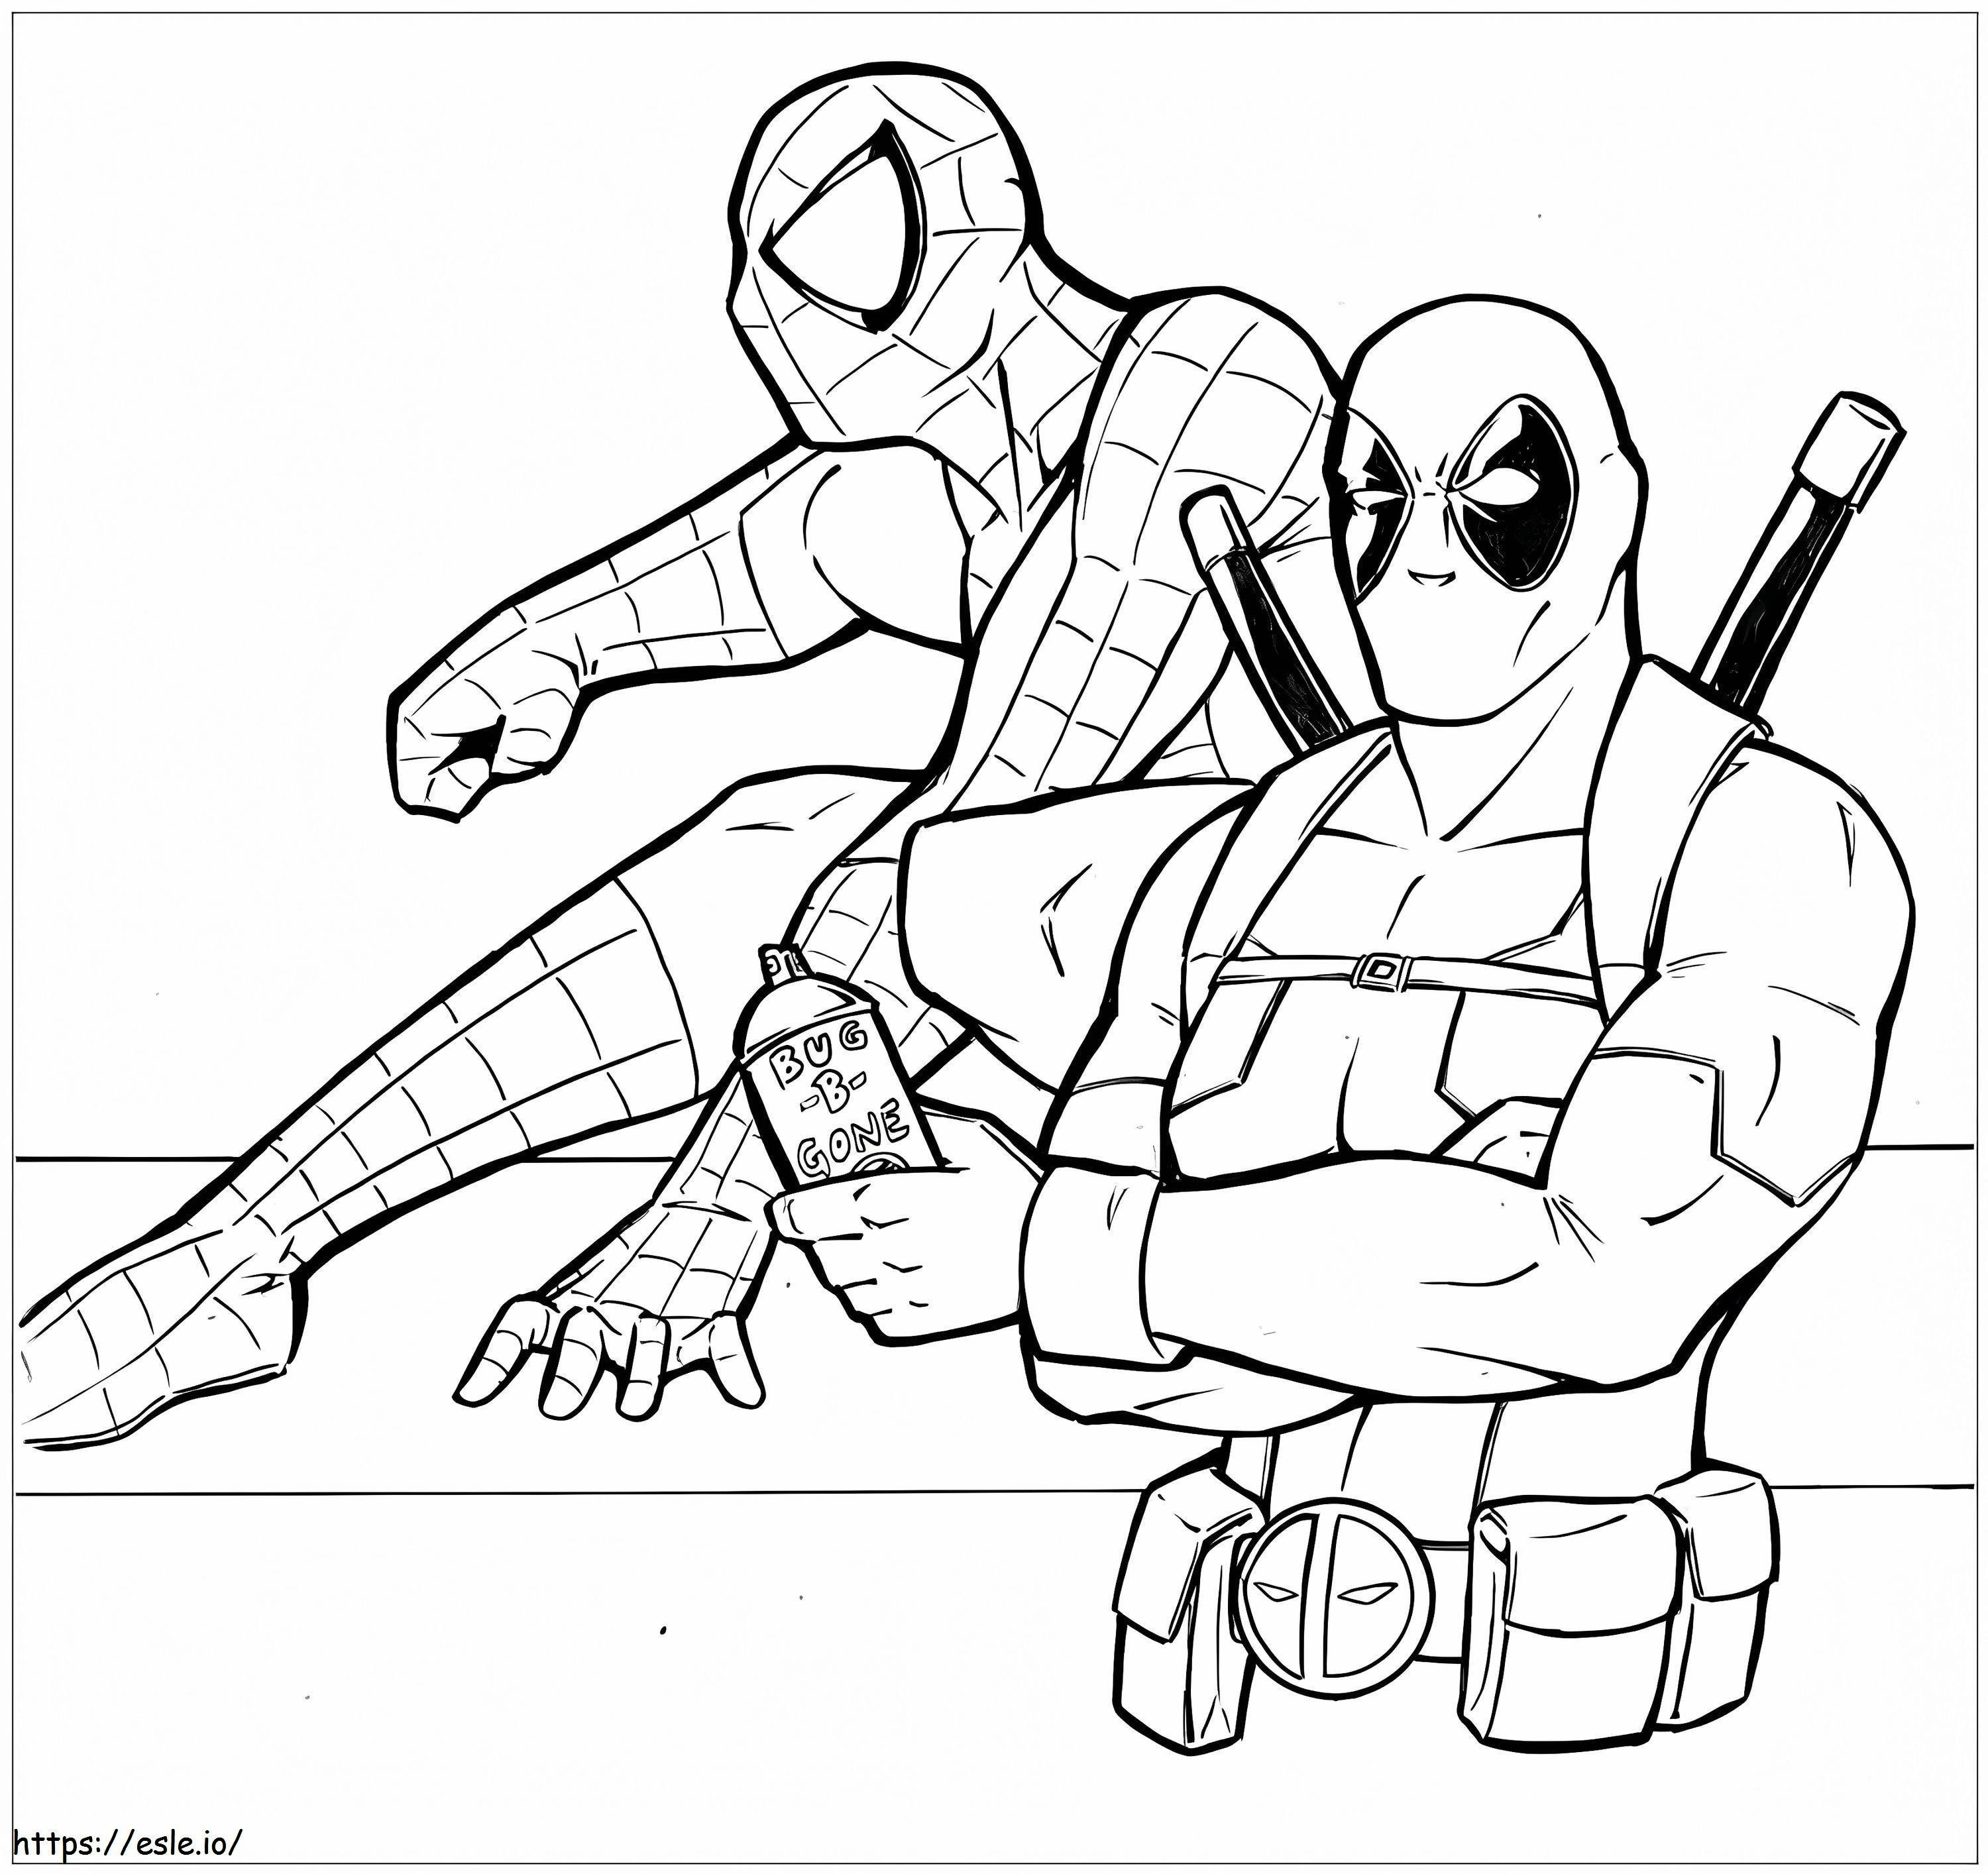 Deadpool And Spider-Man coloring page